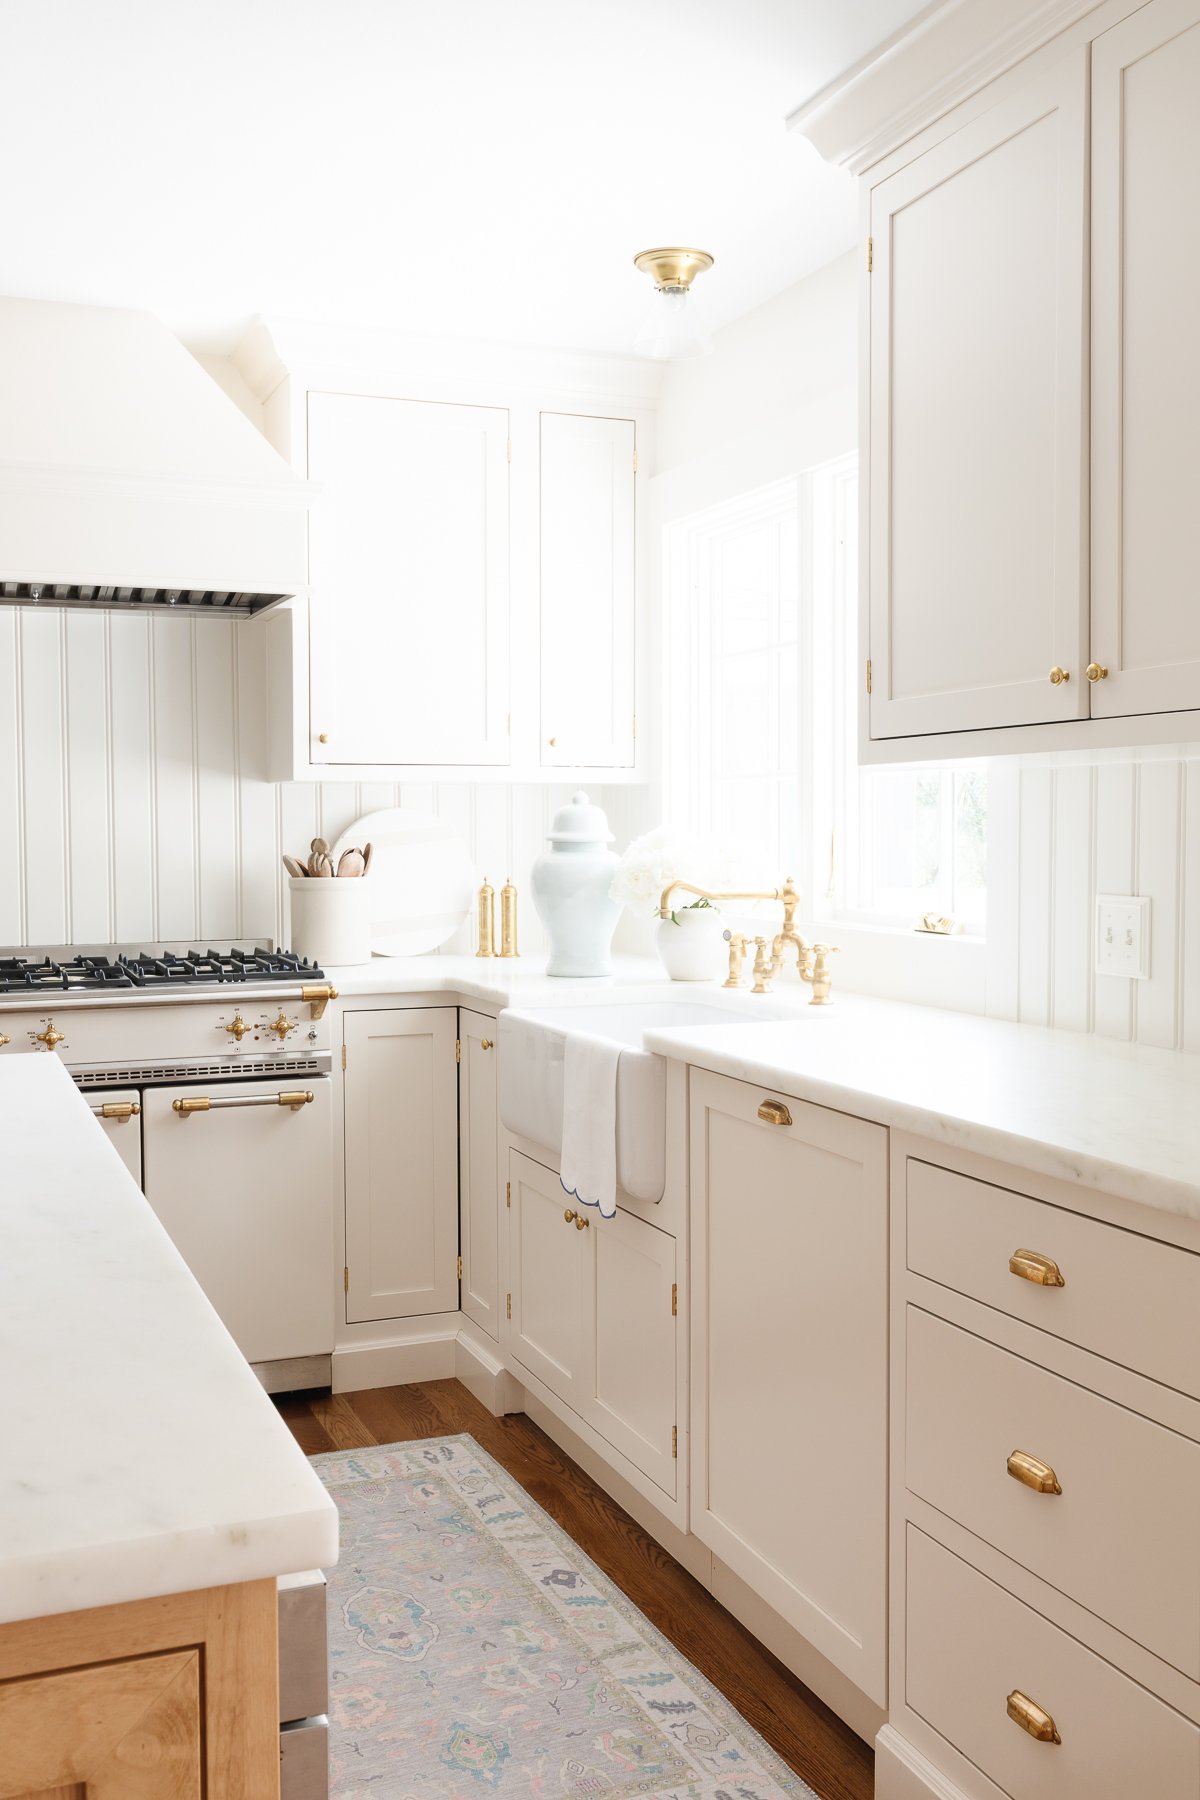 A bright, clean kitchen with white cabinetry featuring shaker cabinet knob placement, marble countertops, and brass fixtures.